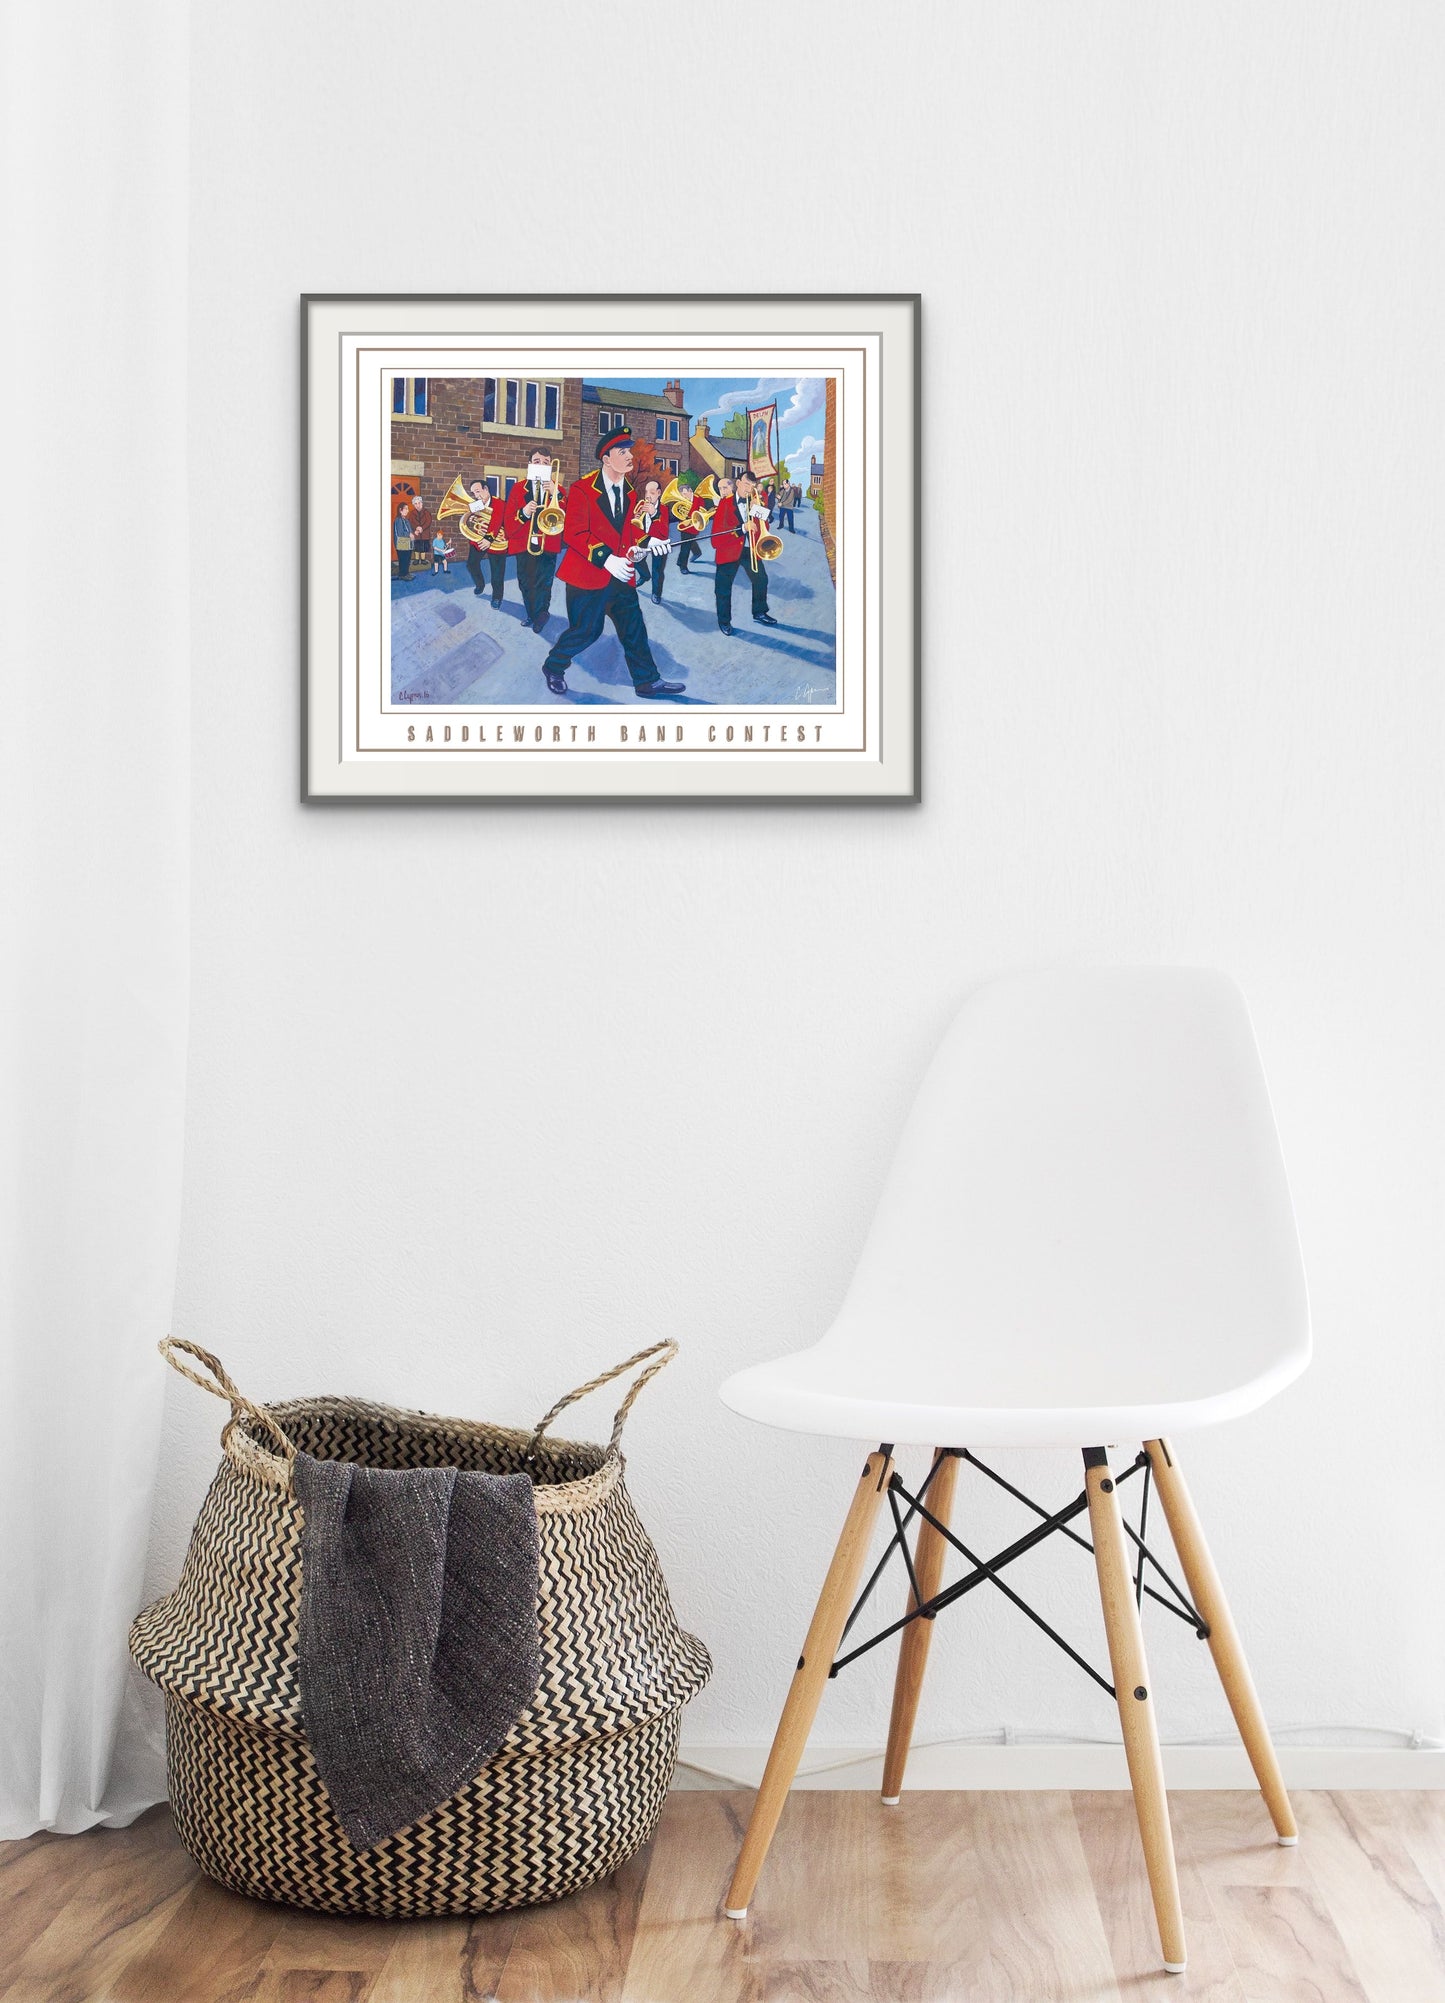  A parade of brass at the famous Whit Friday celebrations in Saddleworth, Oldham.  Reproduced from my original painting 'the reds go marching' 2016          A2 size         Printed on 250gsm silk board paper - sustainably sourced         Tube rolled ideal for worldwide shipping. The image shows the poster framed on display